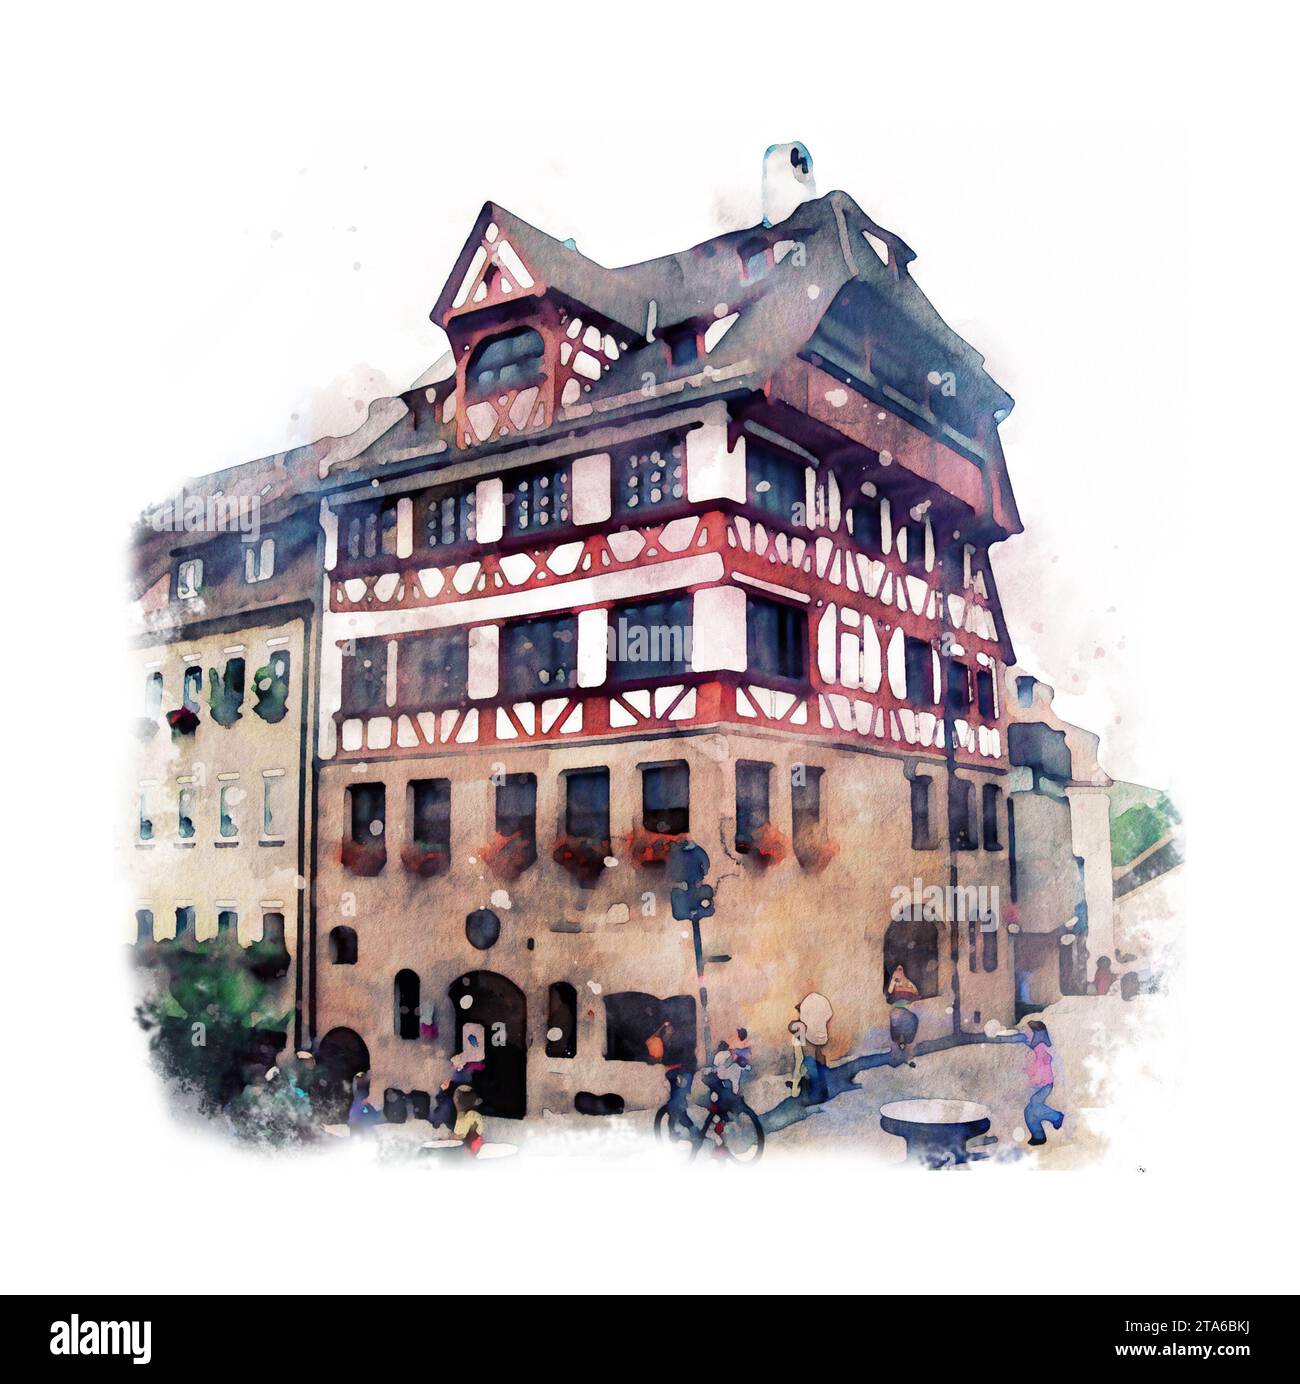 Watercolor building. Durer House in Nurnberg. Expressive watercolor sketch on white background. German landmark. Hand drawn realistic illustration Stock Photo